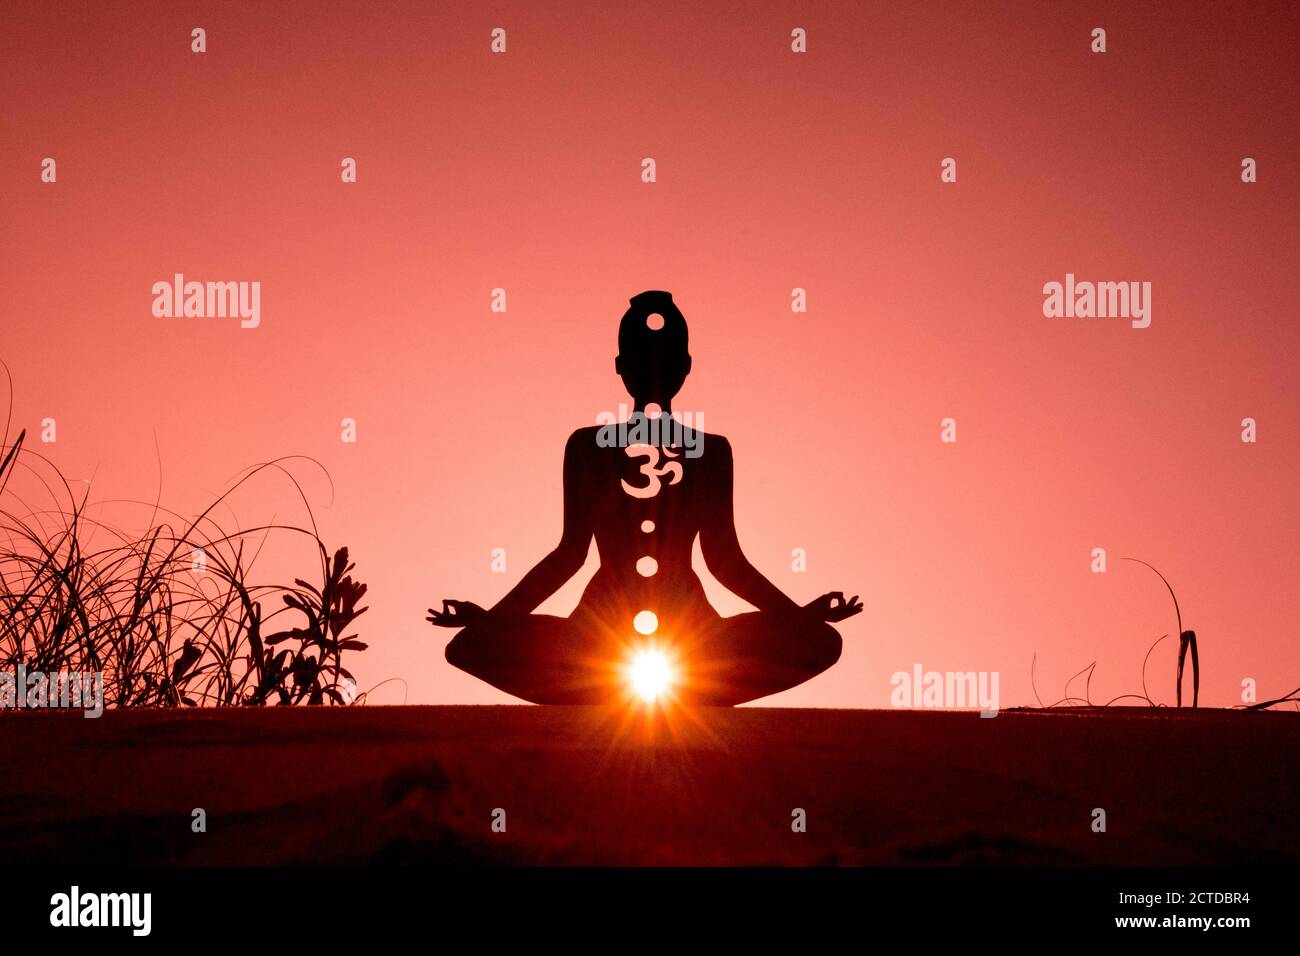 Silhouette of a person doing yoga with the root chakra symbol Stock Photo